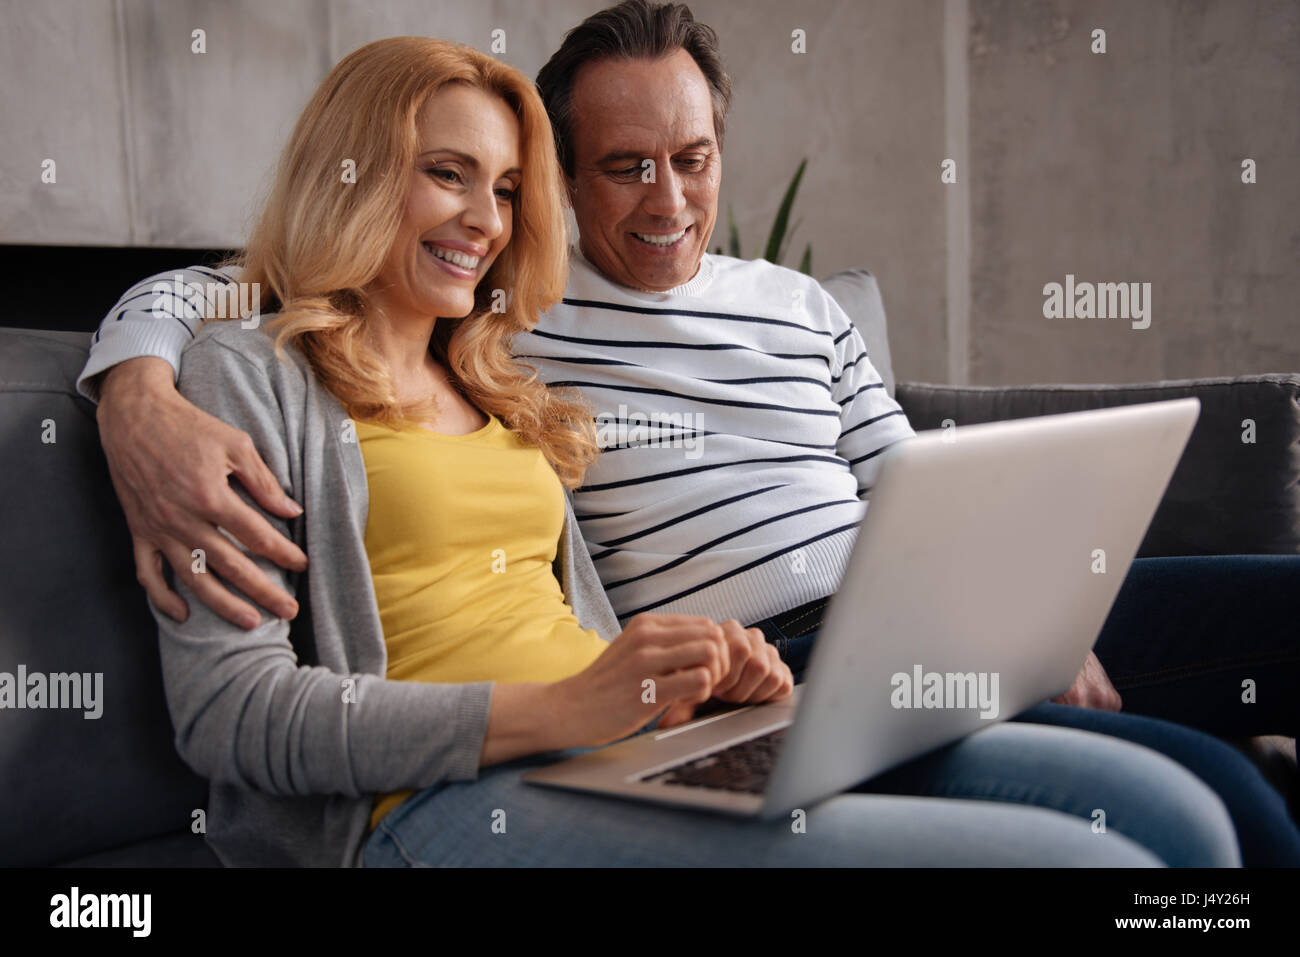 Delighted mature couple enjoying new electronic gadget at home Stock Photo